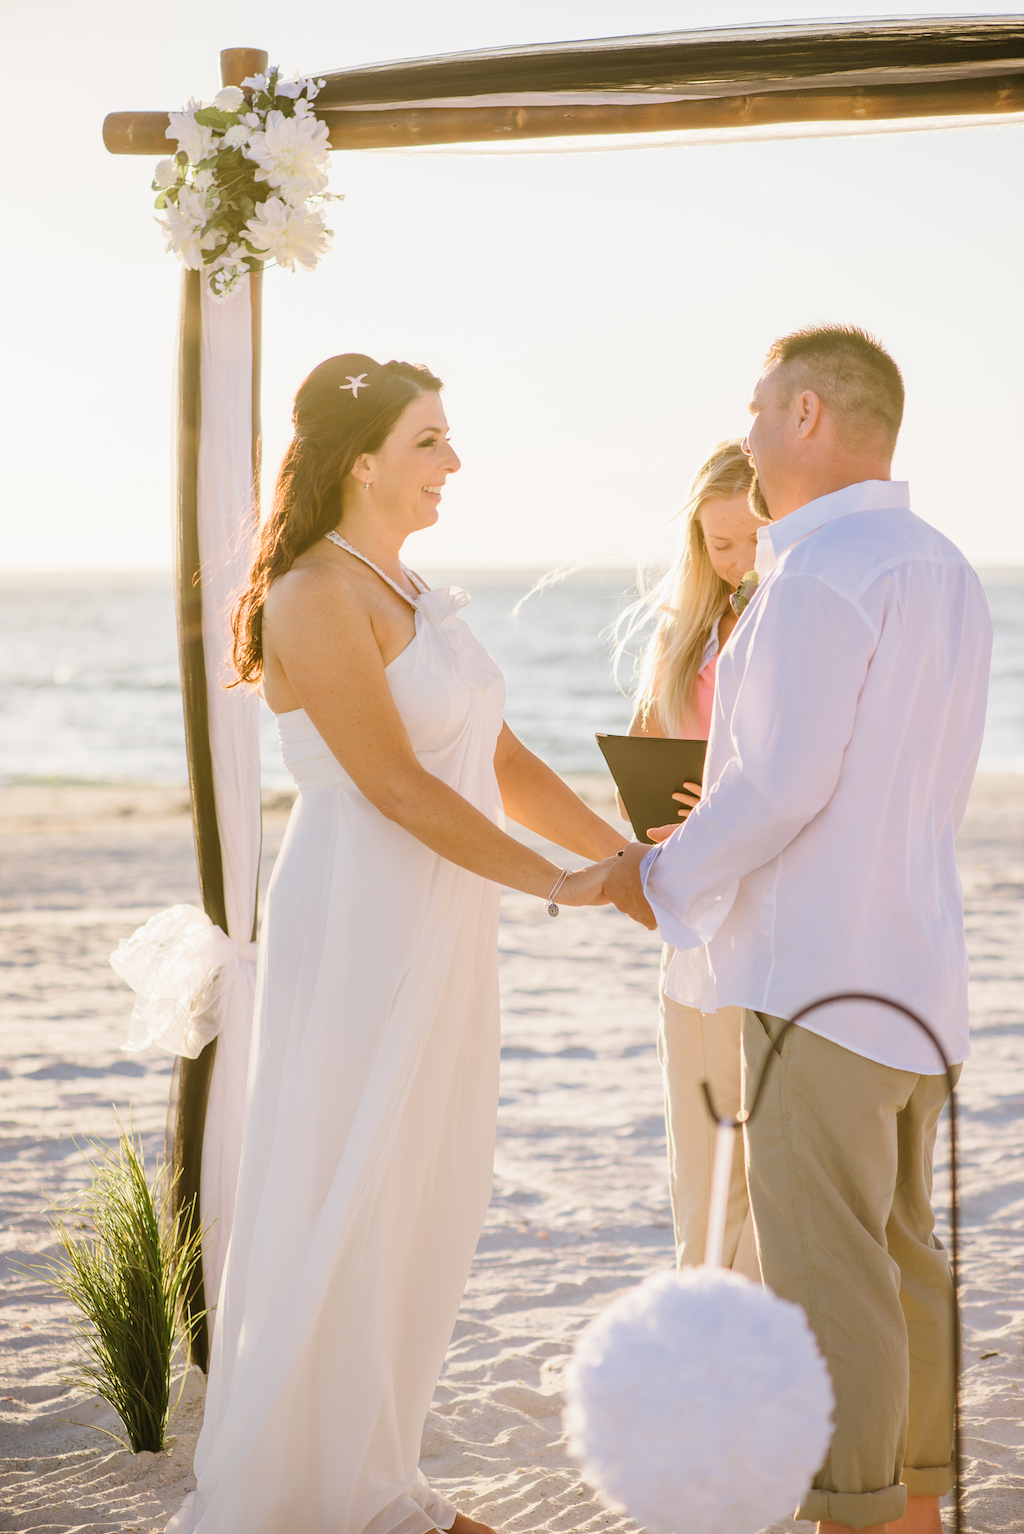 Outdoor Beach Wedding Ceremony with White Draped Wooden Ceremony Arch with Flowers and Greenery, Bride in Halter DaVinci Dress | Tampa Bay Officiant and Planner Gulf Beach Weddings